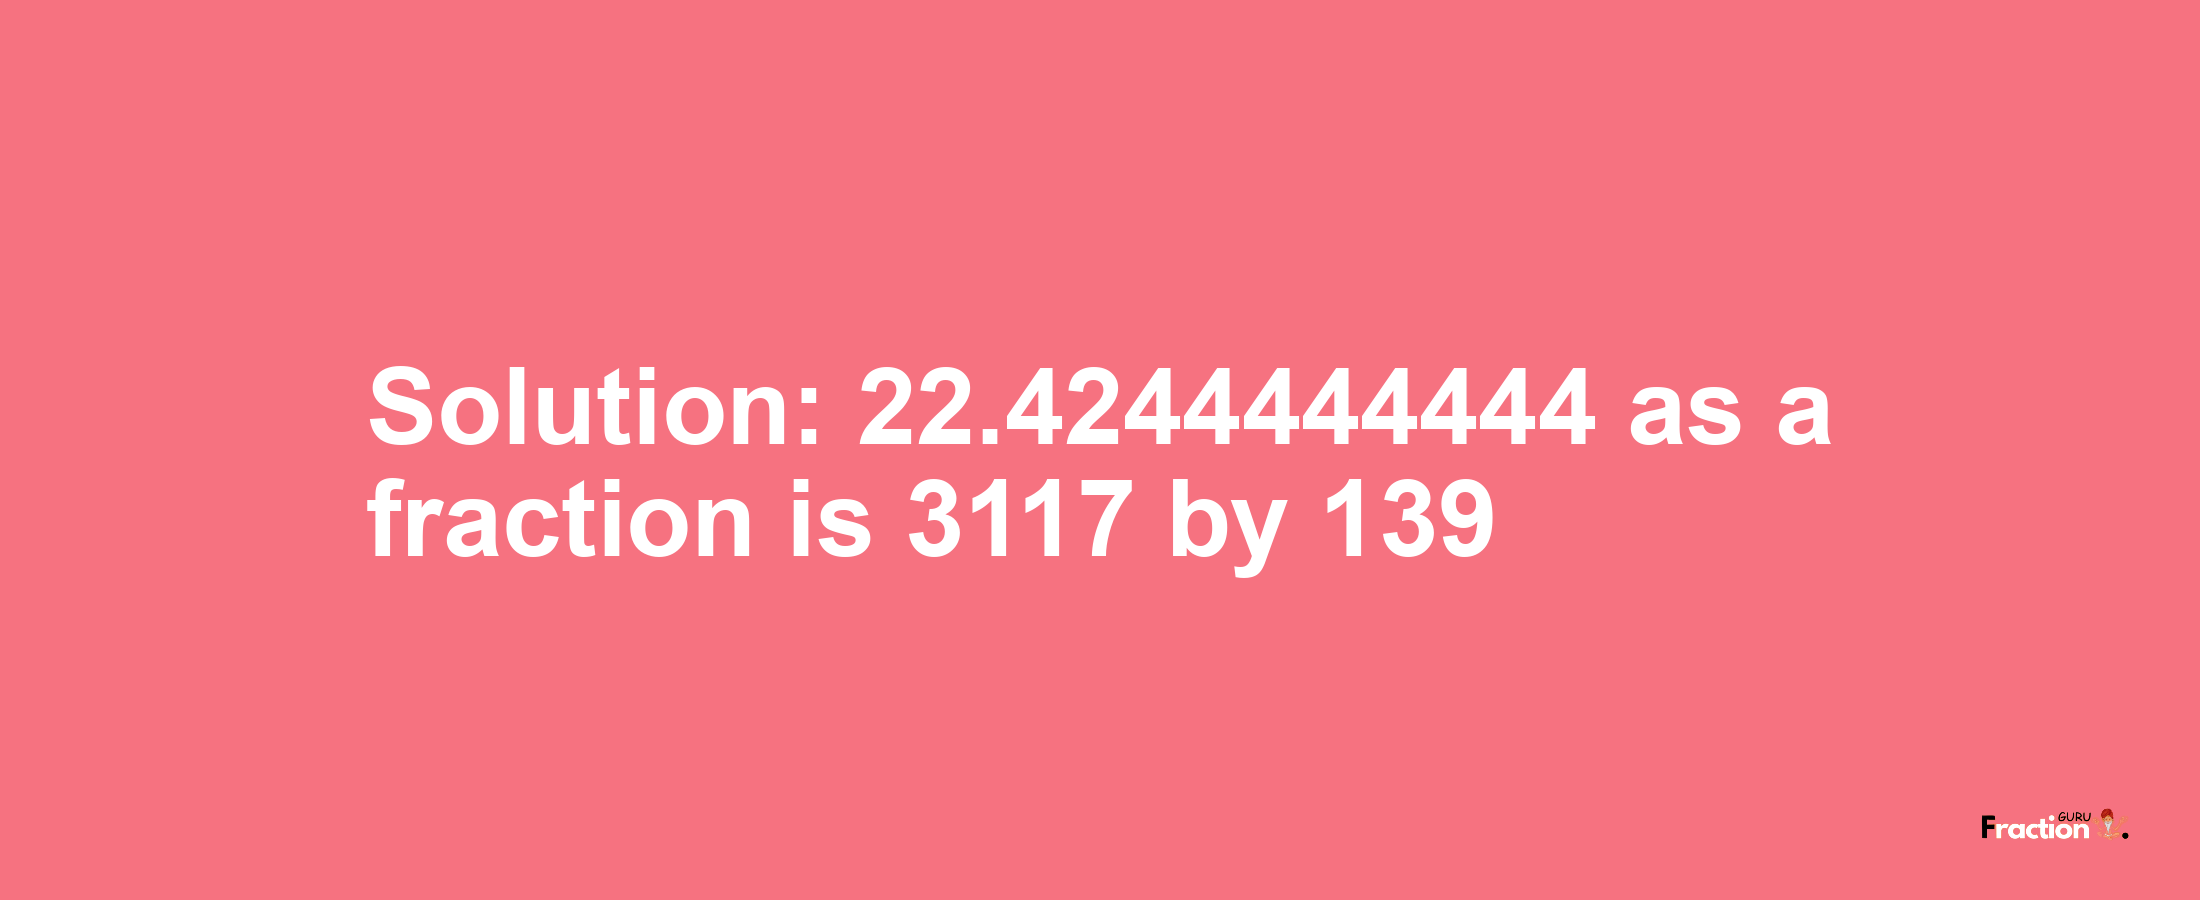 Solution:22.4244444444 as a fraction is 3117/139